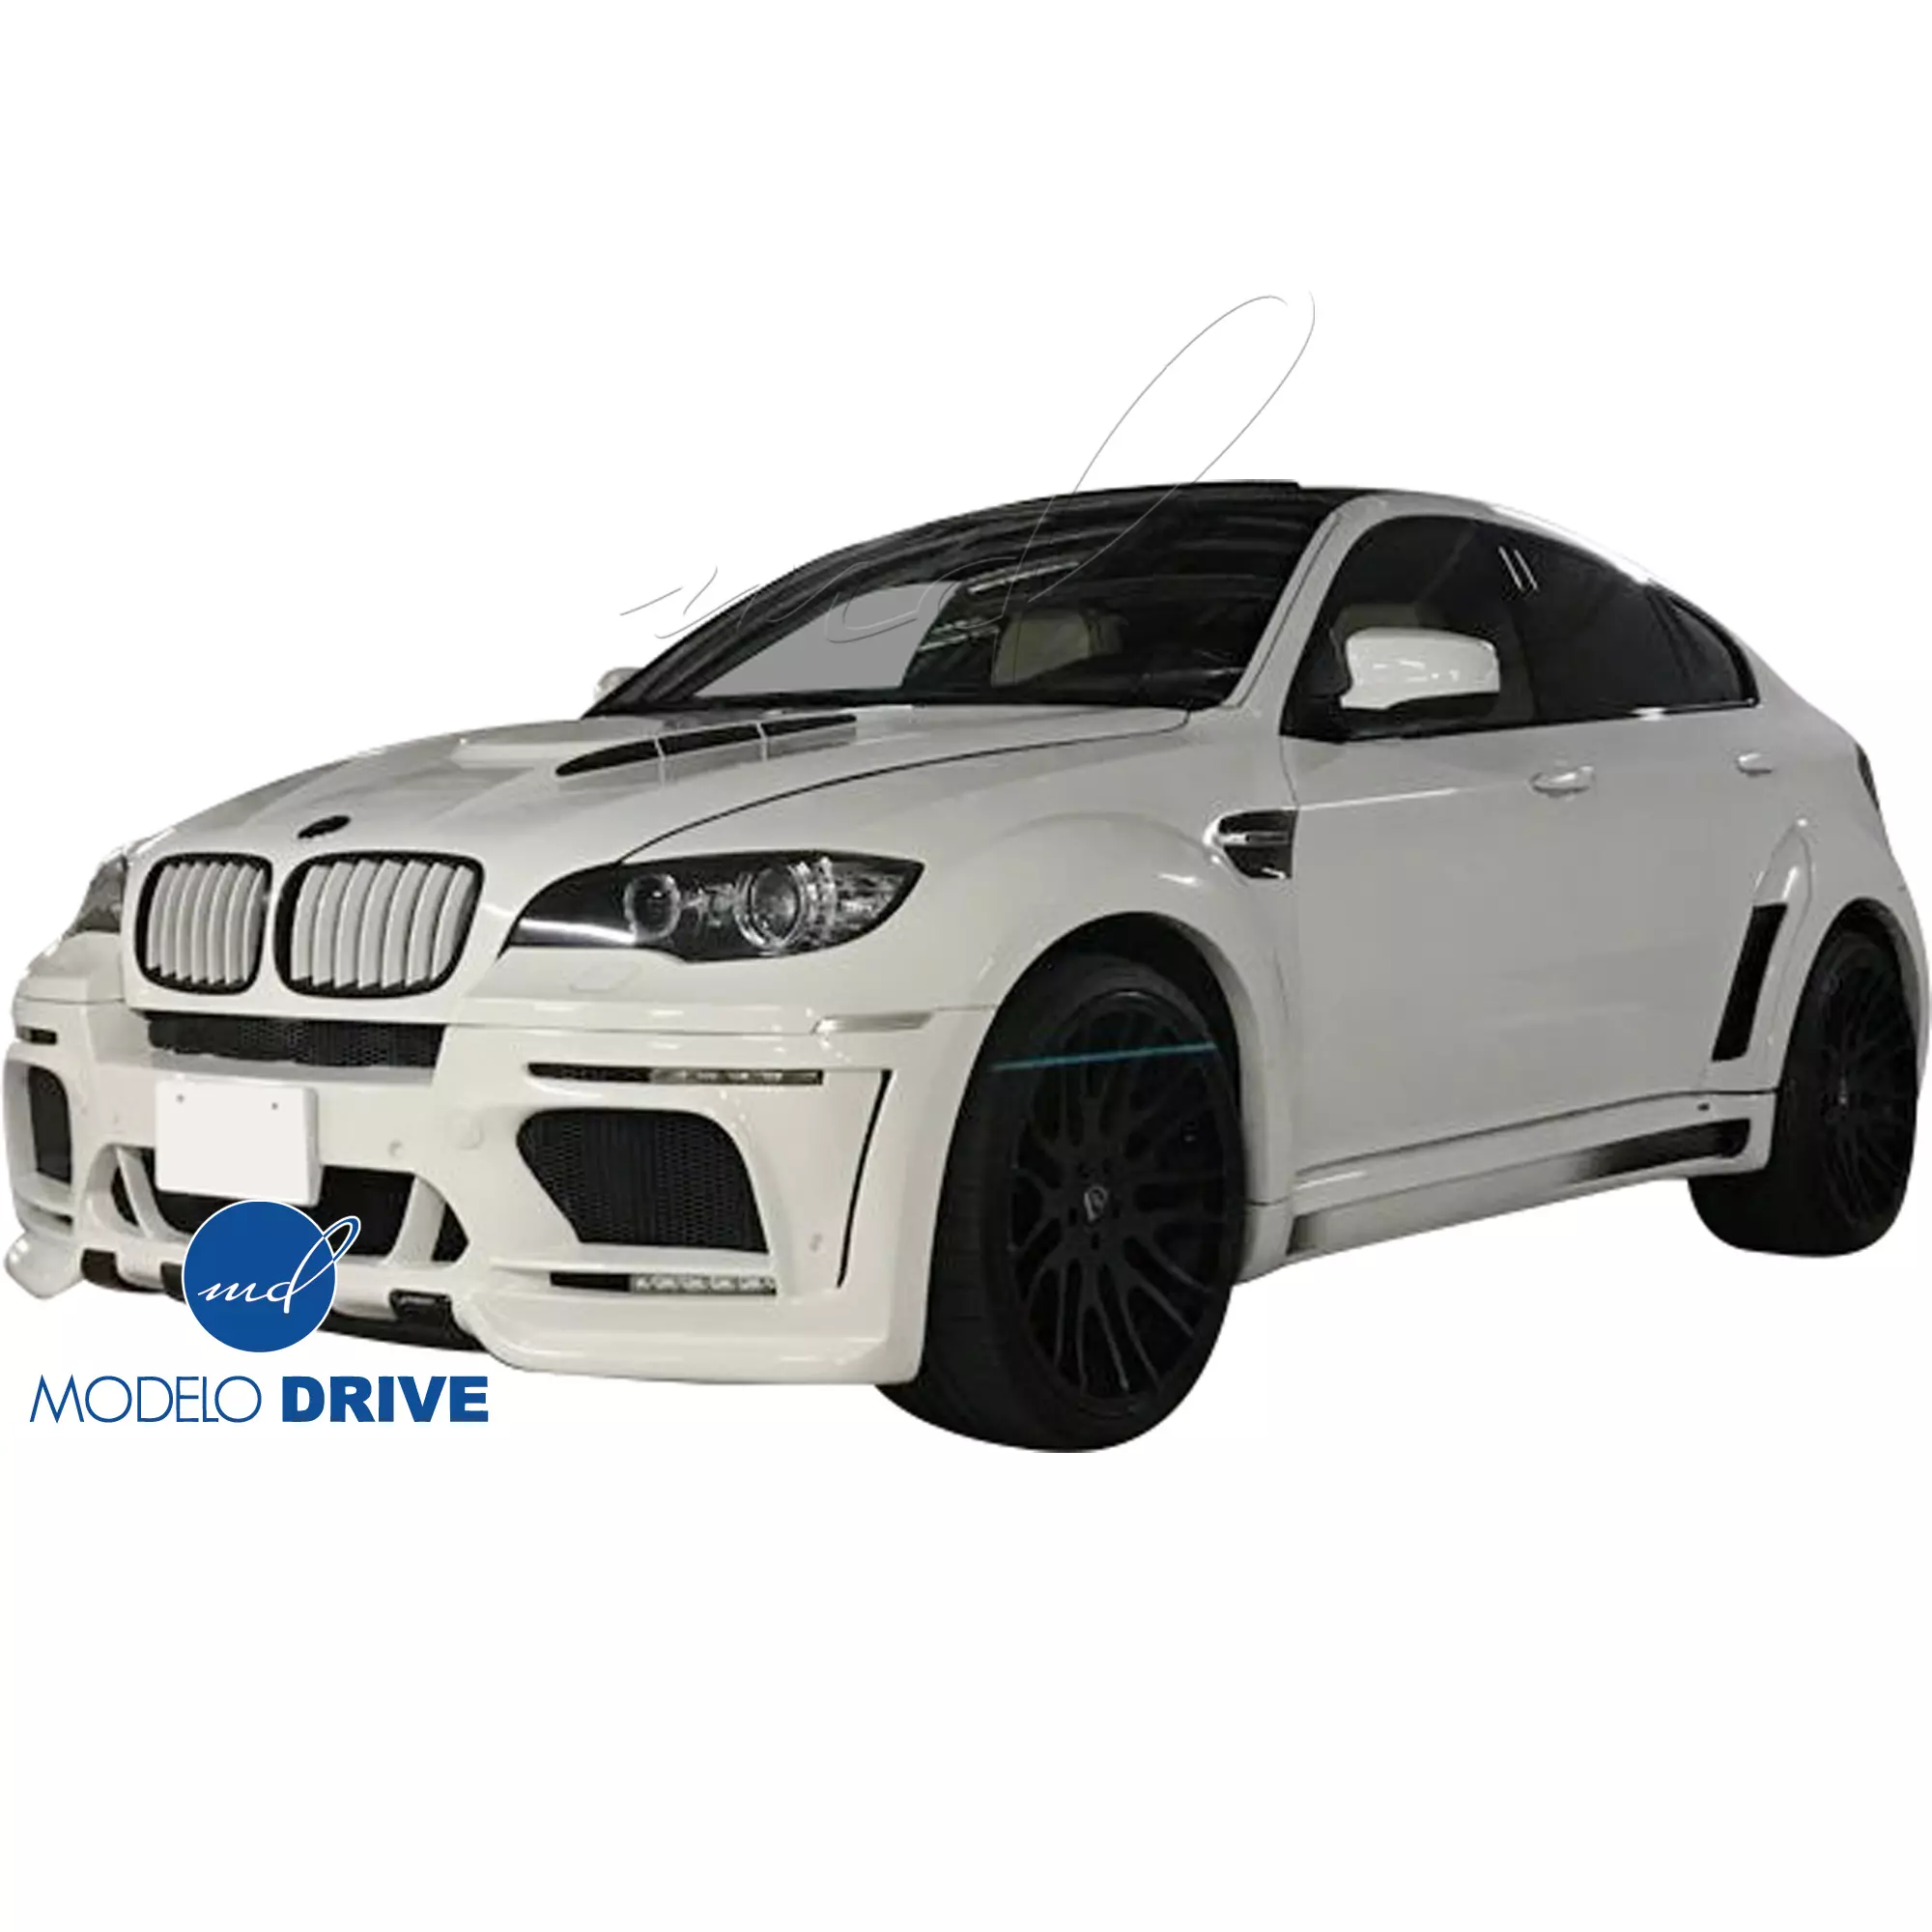 ModeloDrive FRP HAMA Wide Body Fenders (front) 2pc > BMW X6 E71 2008-2014 - Image 6